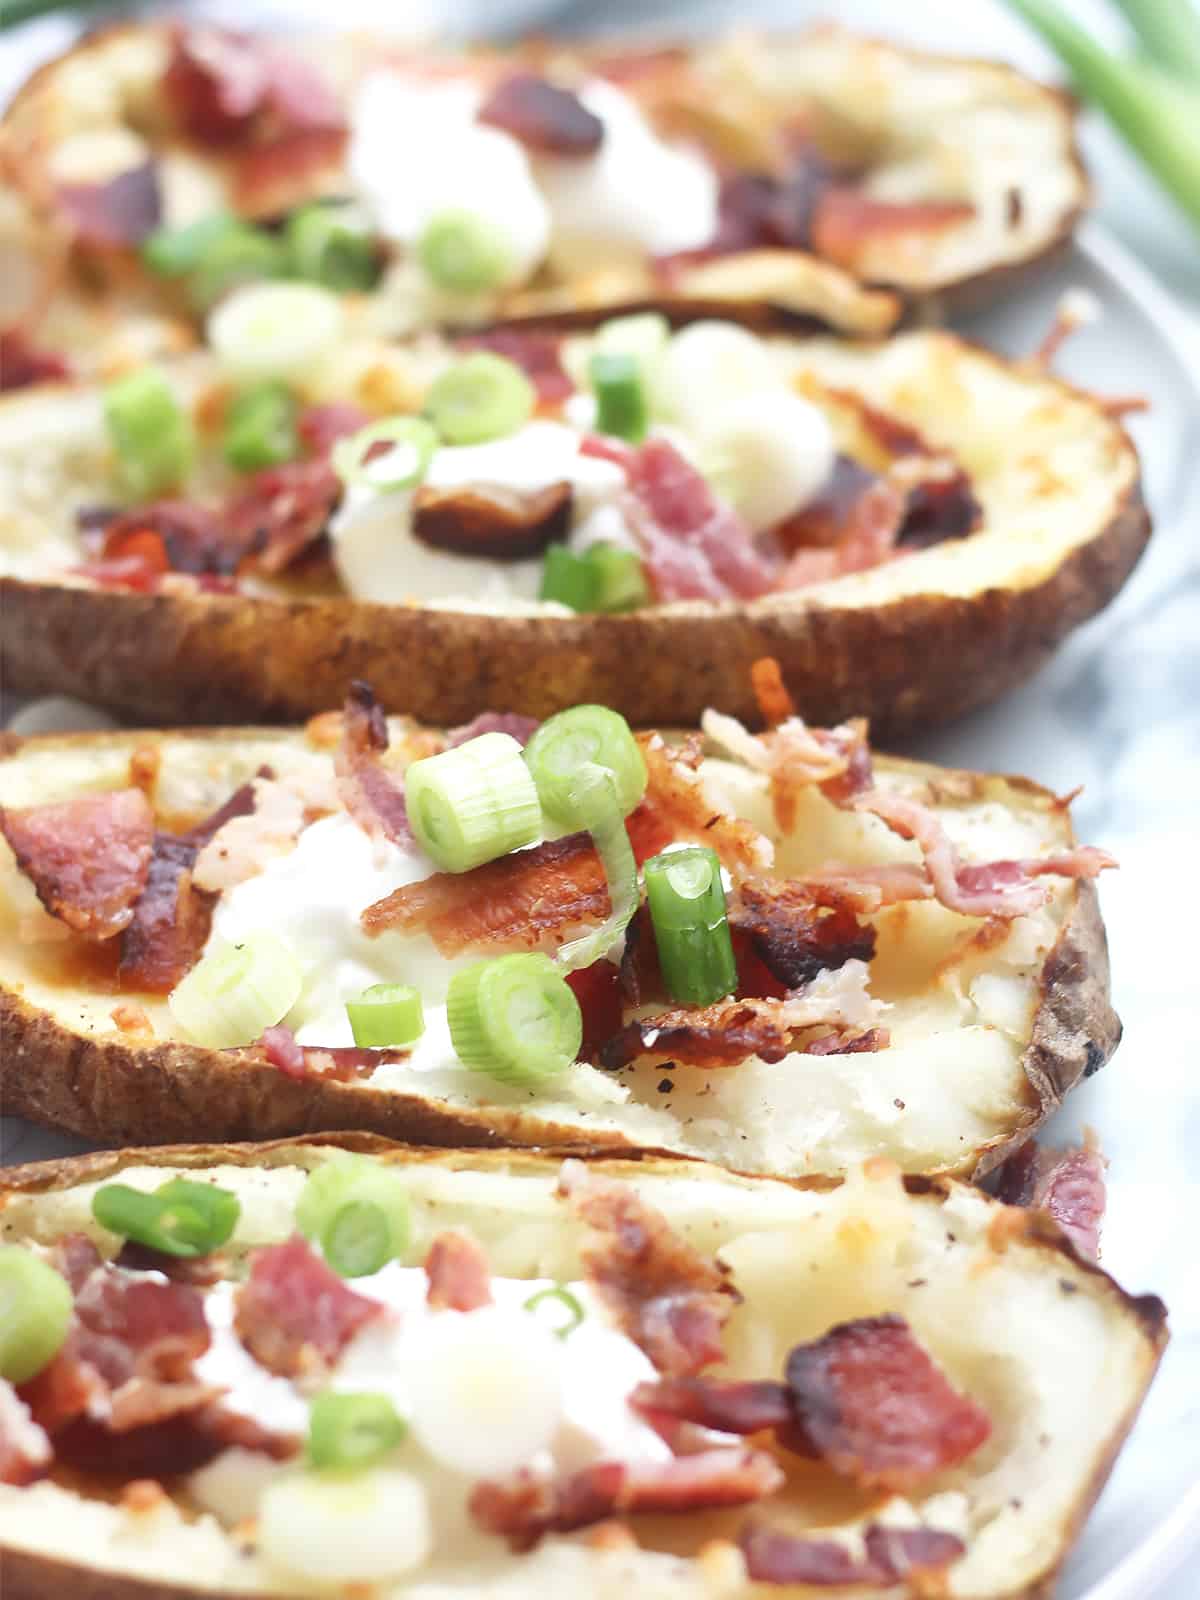 Close up of bacon, sour cream and green onions on top of the potato skins.